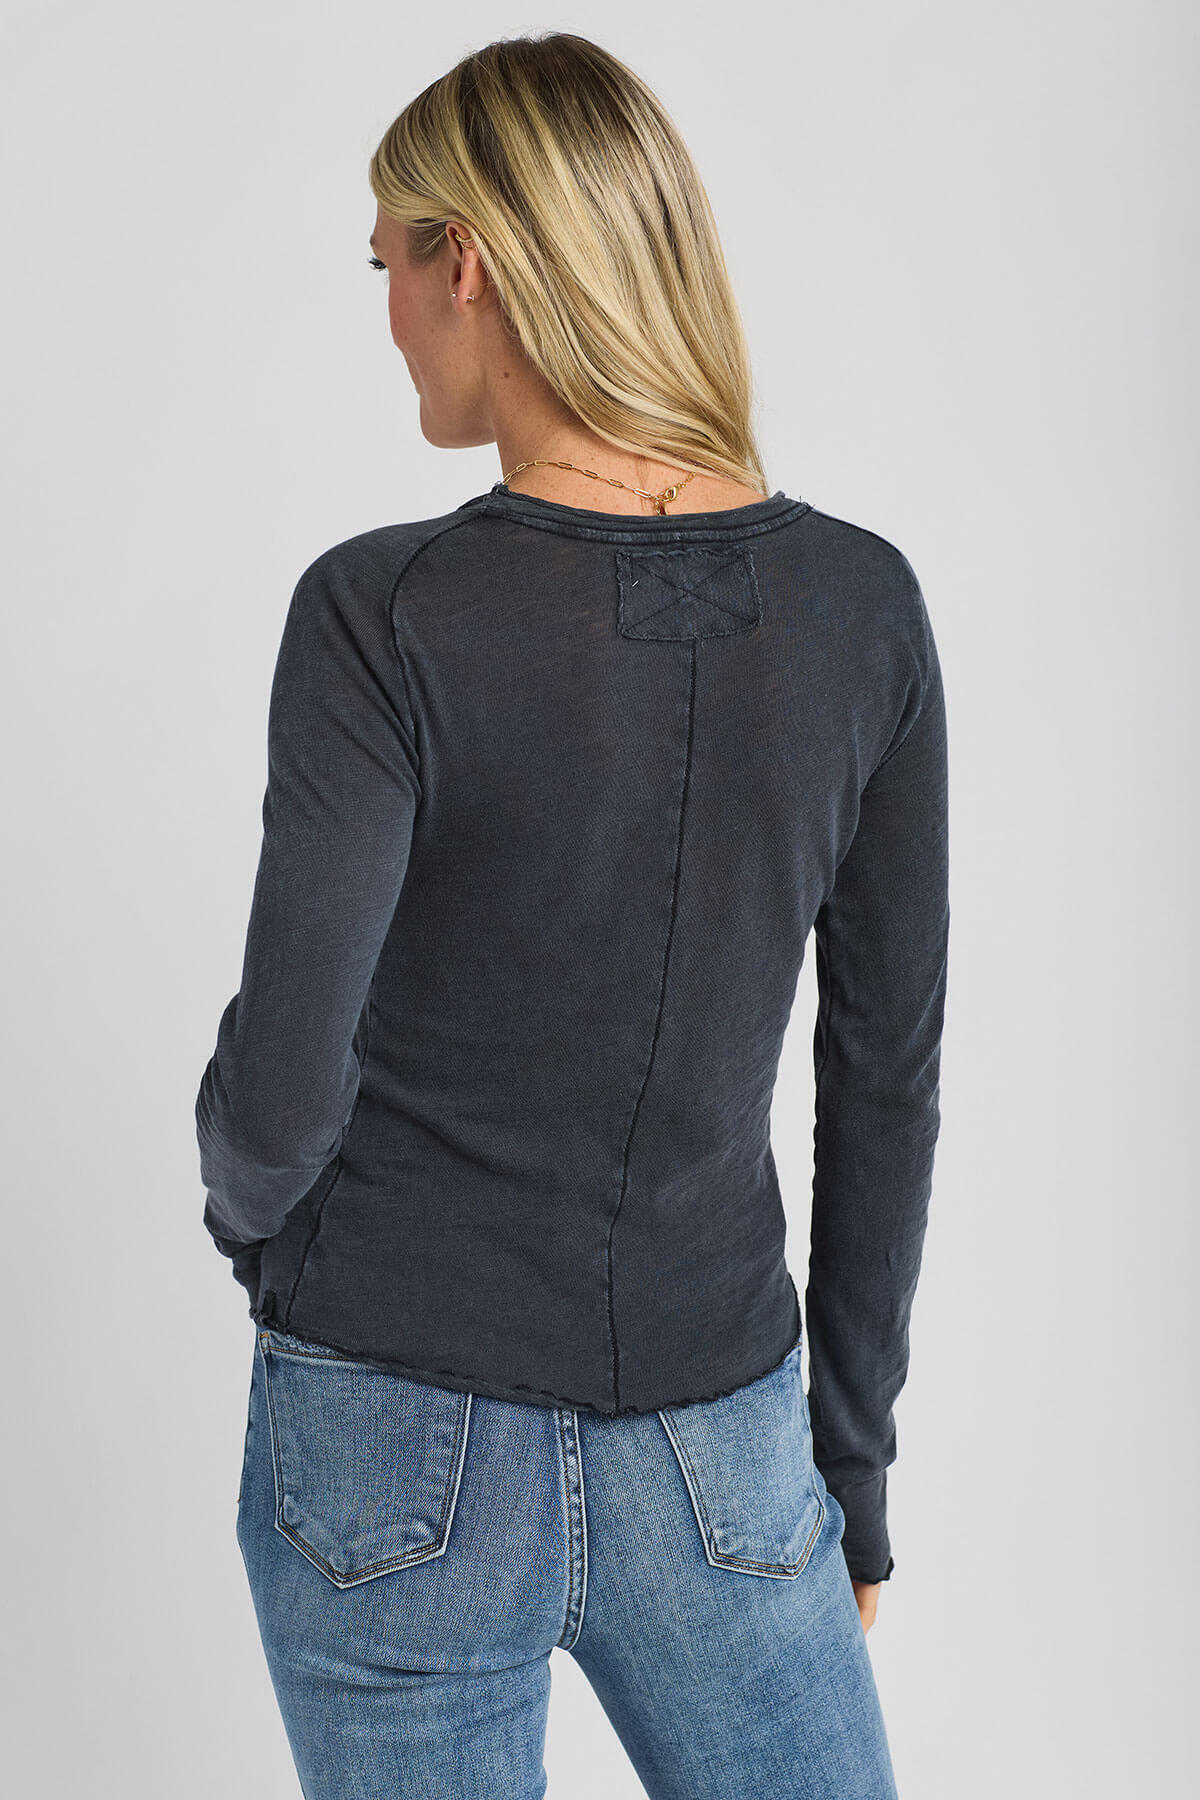 Out From Under Everyday Seamless Stretch Long-Sleeved Baby Tee